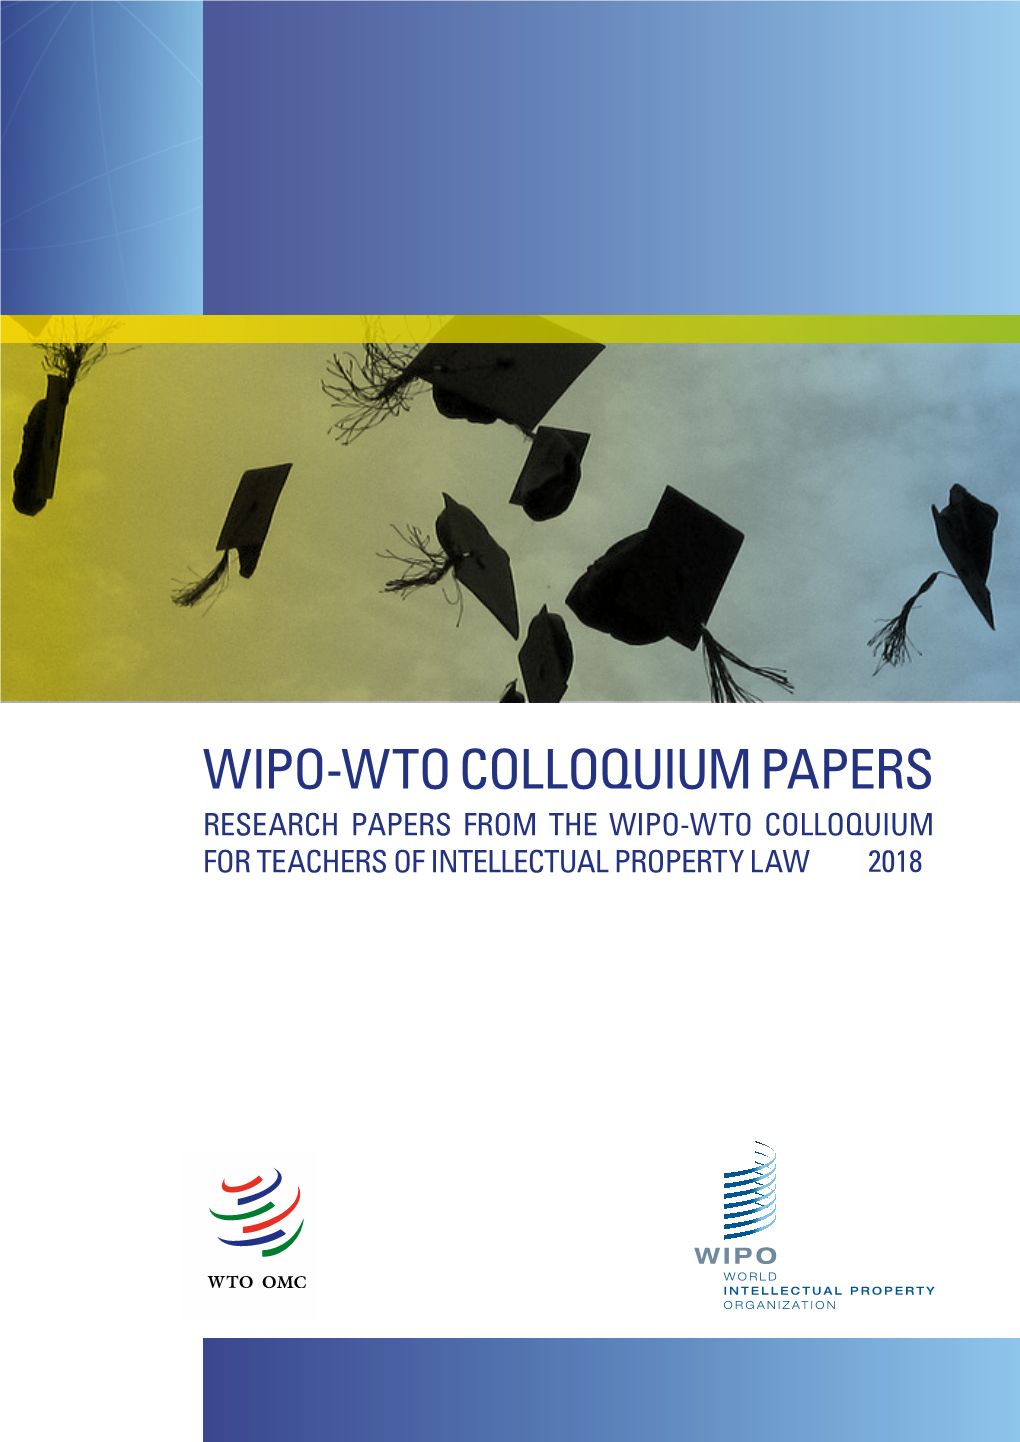 Wipo-Wto Colloquium Papers Research Papers from the Wipo-Wto Colloquium for Teachers of Intellectual Property Law 20182018 Apers